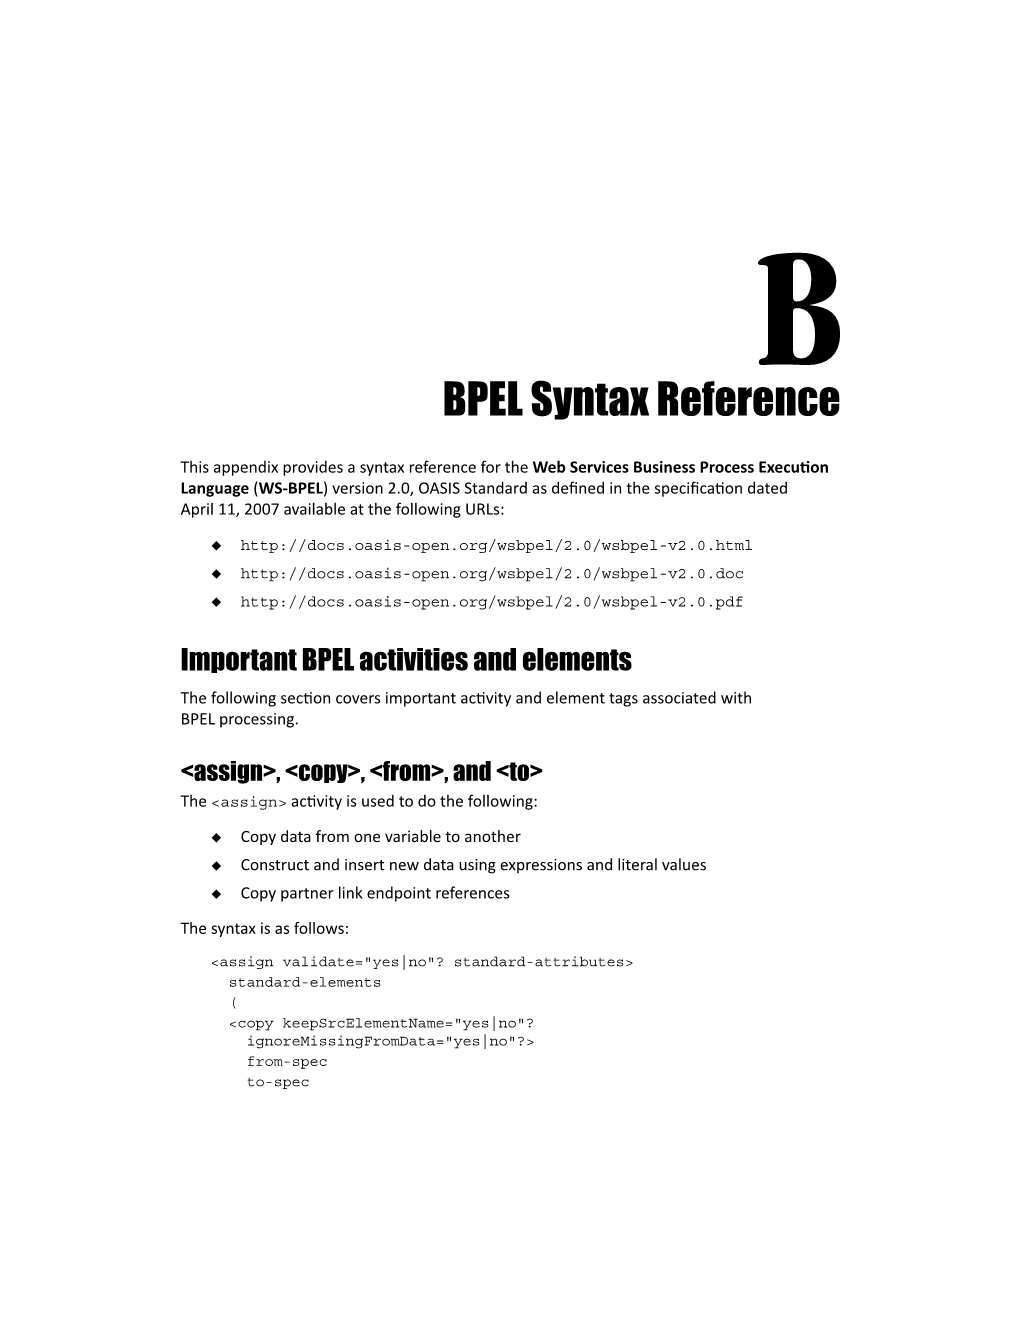 BPEL Syntax Reference